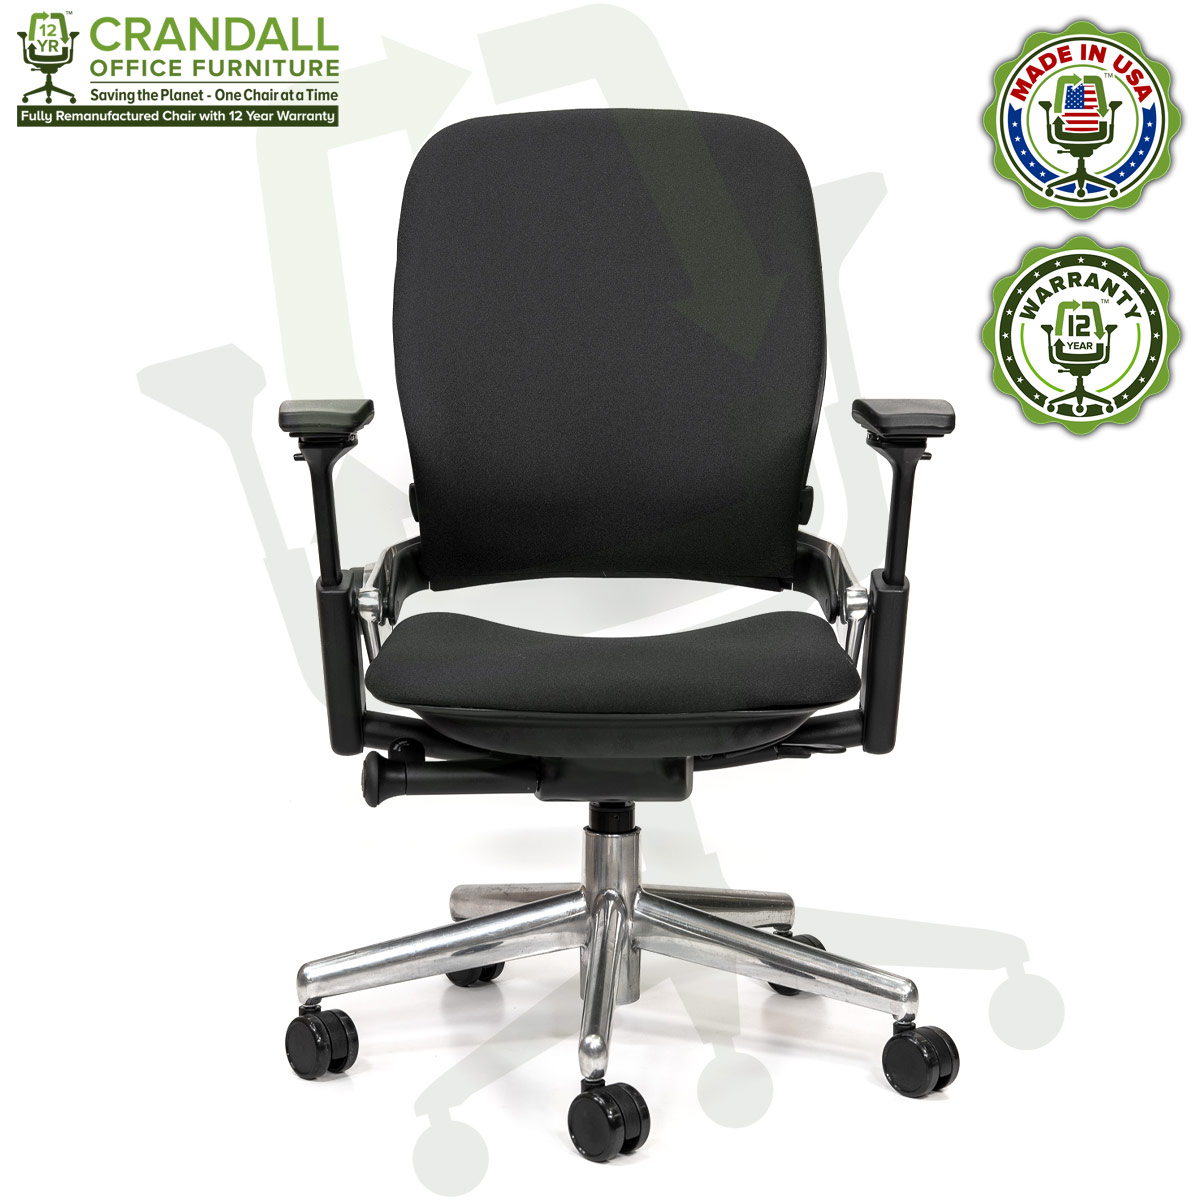 Crandall Office Furniture Remanufactured Steelcase V2 Leap Chair - Polished Aluminum Frame 01